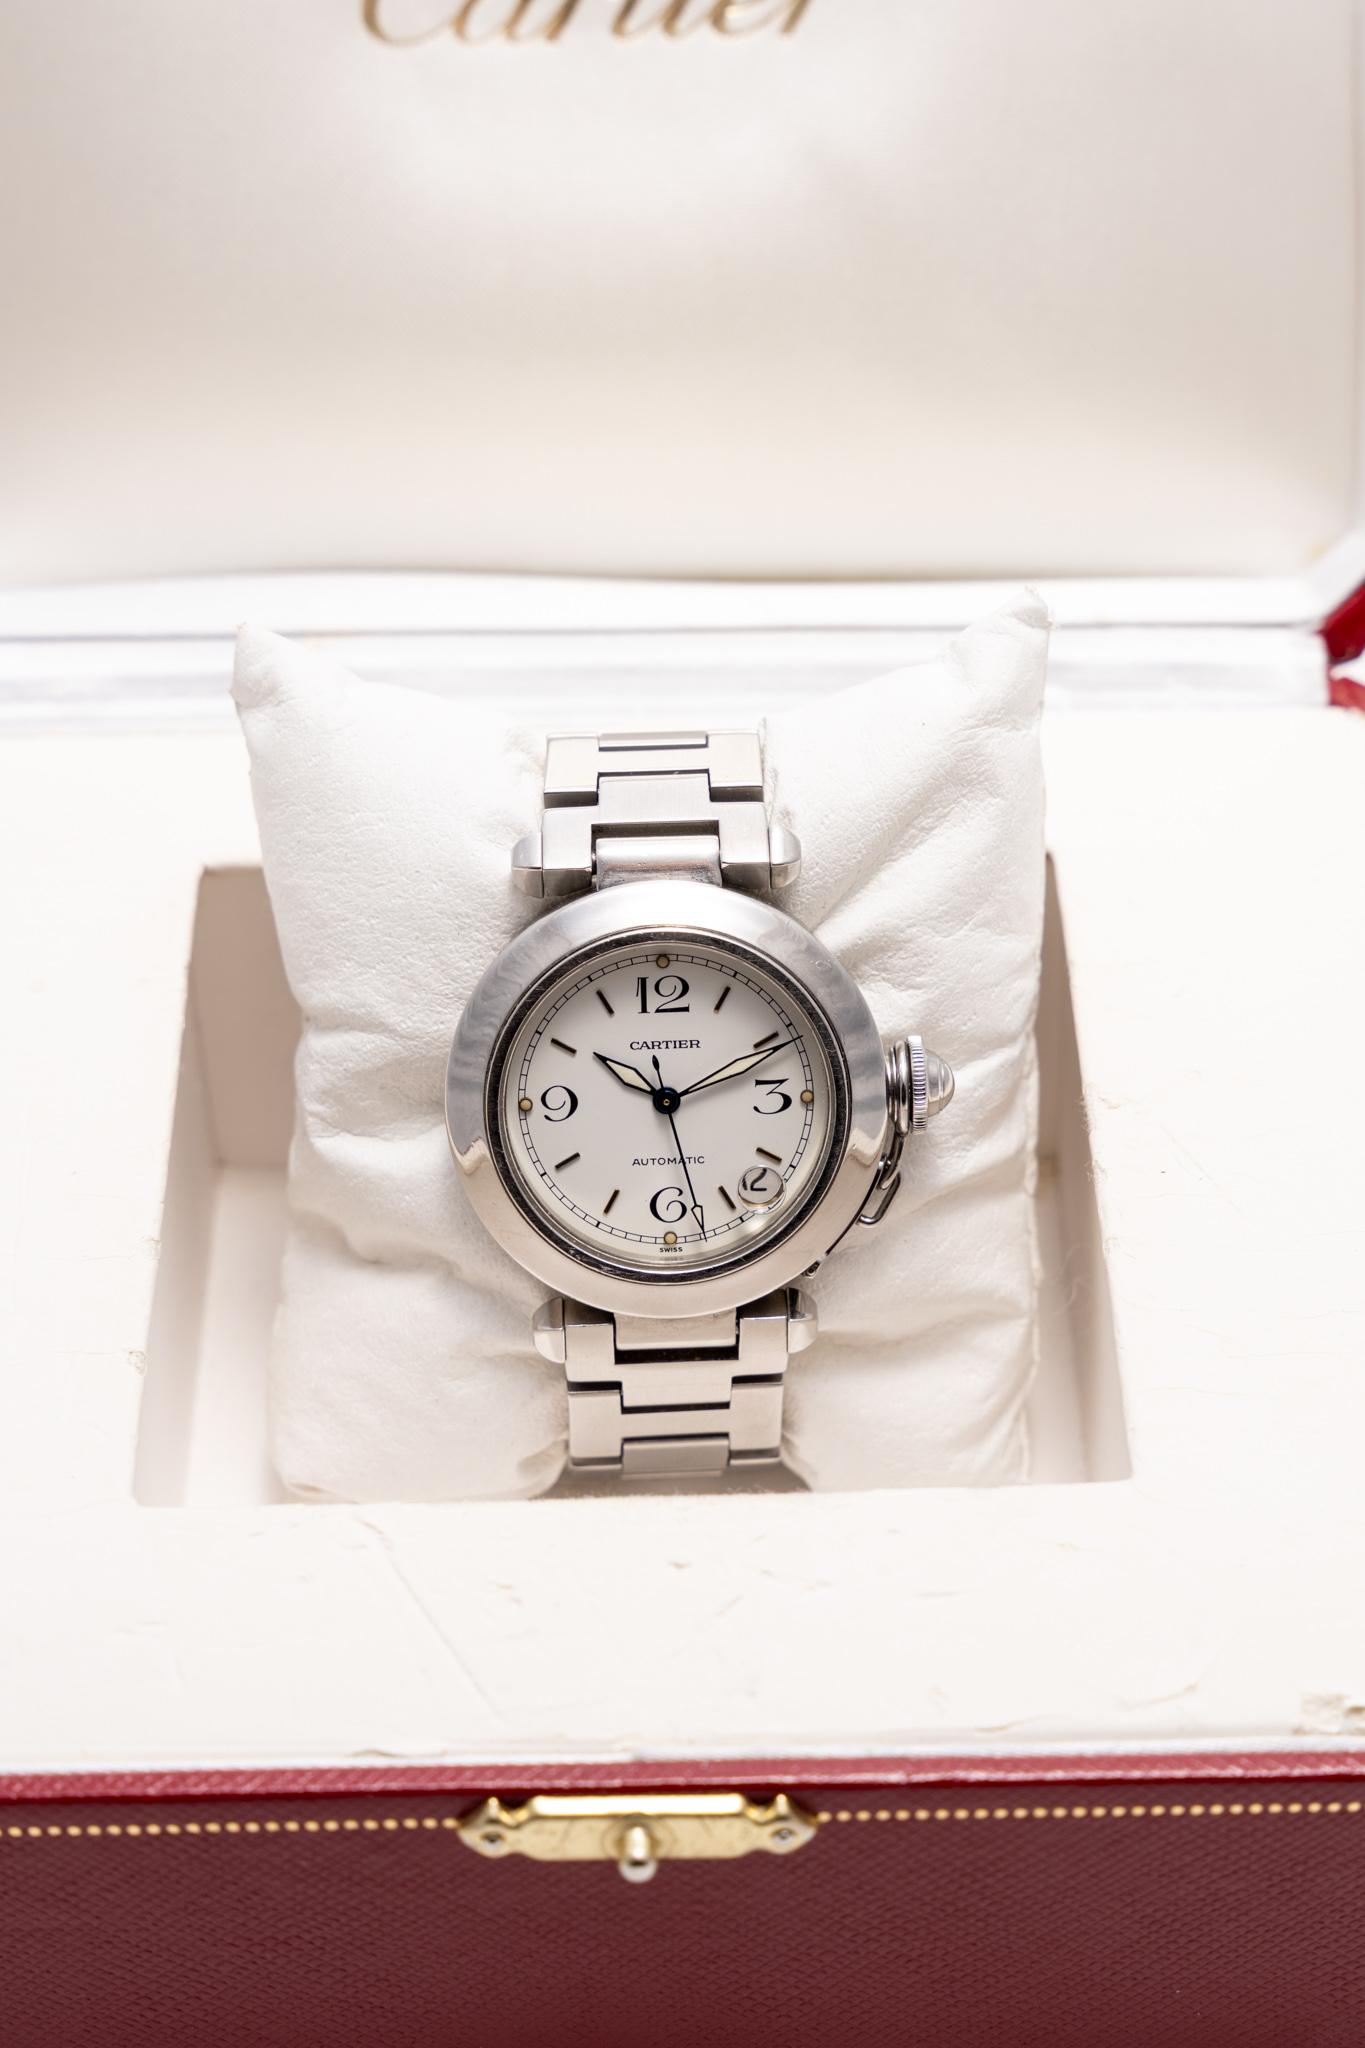 The watch is in a very good condition and it’s working well. It shows slight signs of wear and scratches. The watch comes with the original Cartier box, along with an AGS Jewelry warranty card. For more information about delivery, warranty and